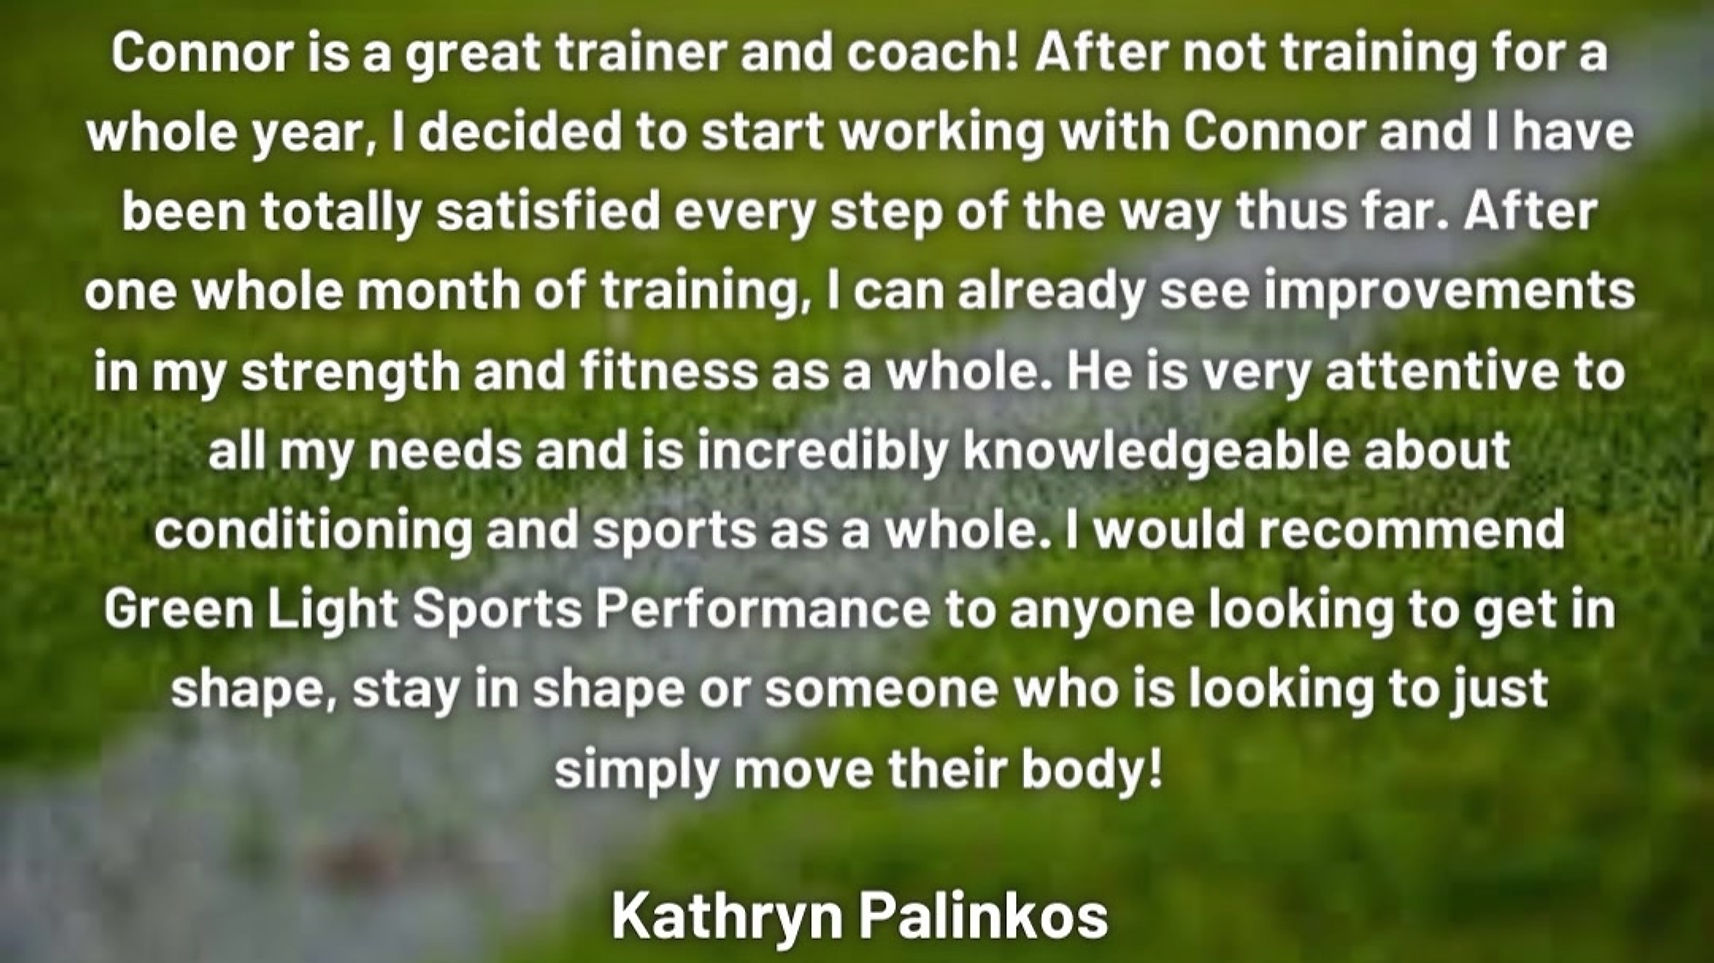 Client Review - Kathryn Palinkos